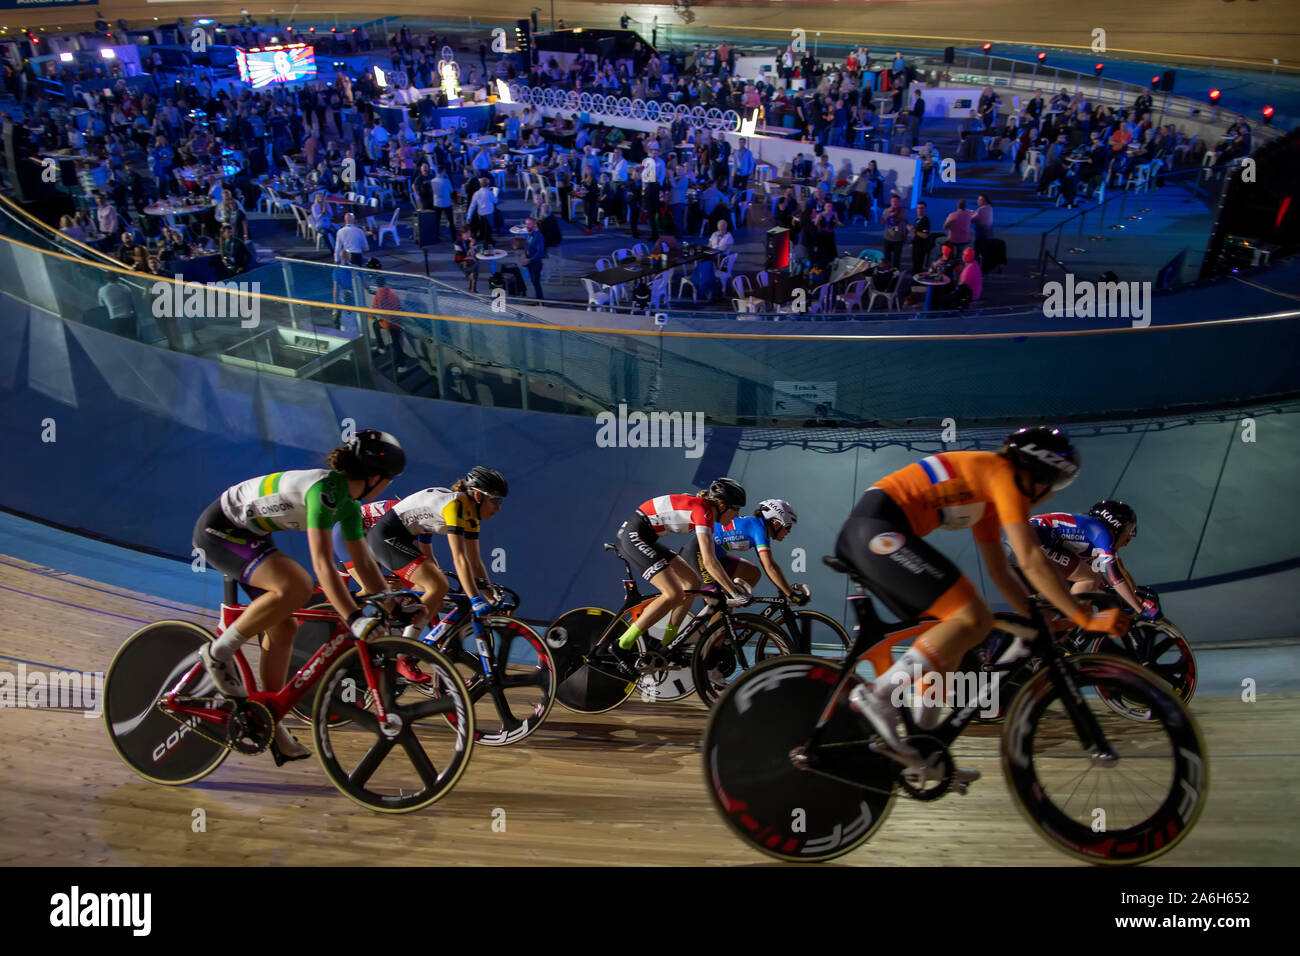 Lee Valley VeloPark, London, UK. 26th Oct, 2019. Six Day Series Cycling London; The crowd watches the Women's Team Elimination Race - Editorial Use Credit: Action Plus Sports/Alamy Live News Stock Photo